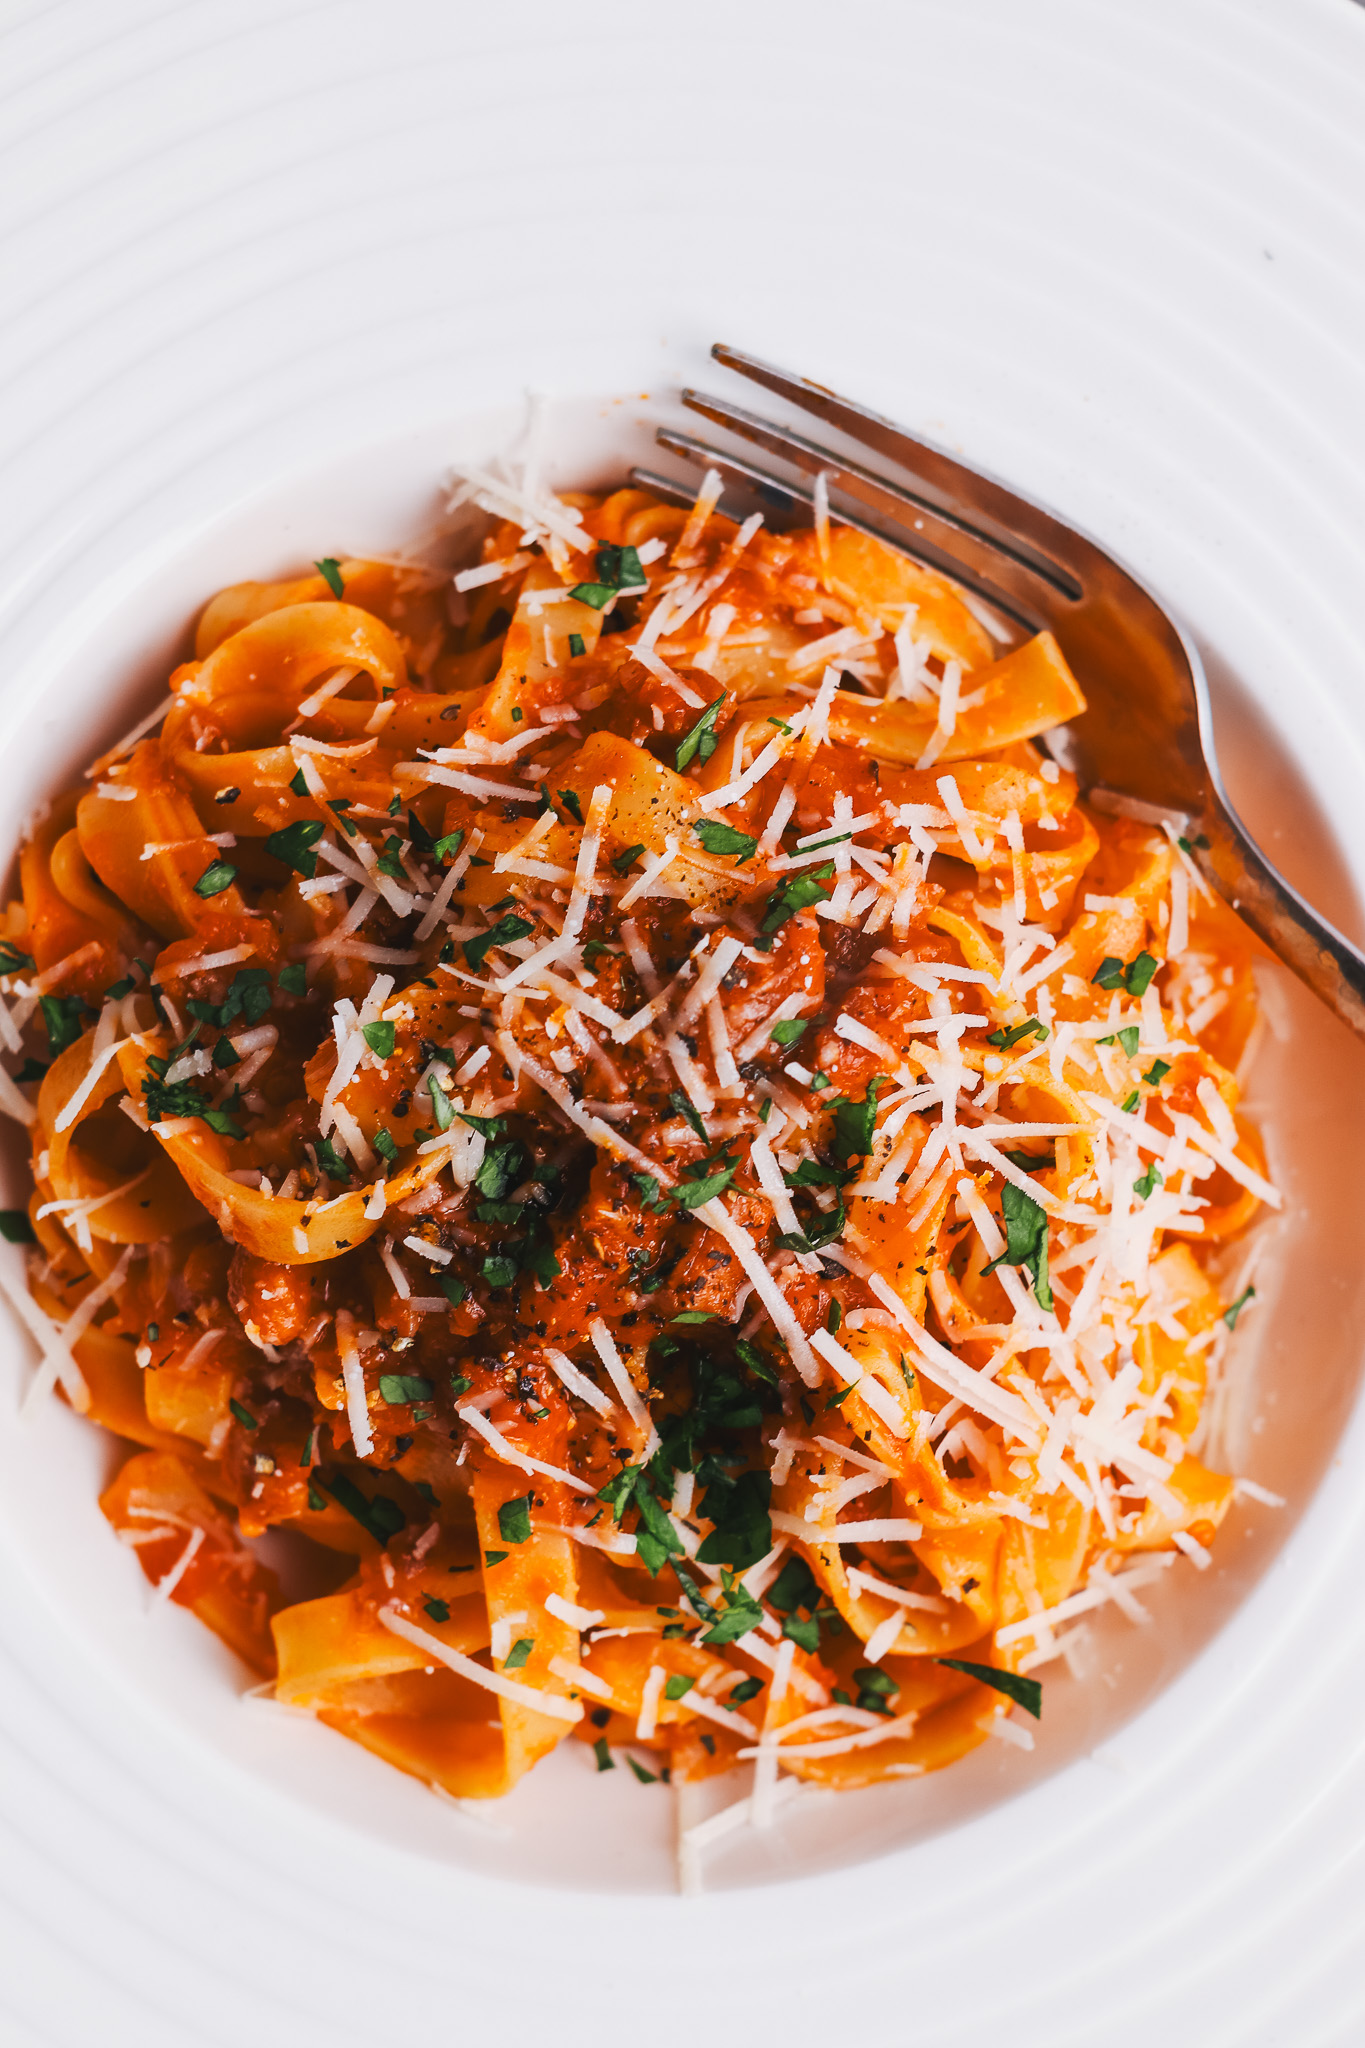 Tagliatelle amatriciana in a bowl with a fork